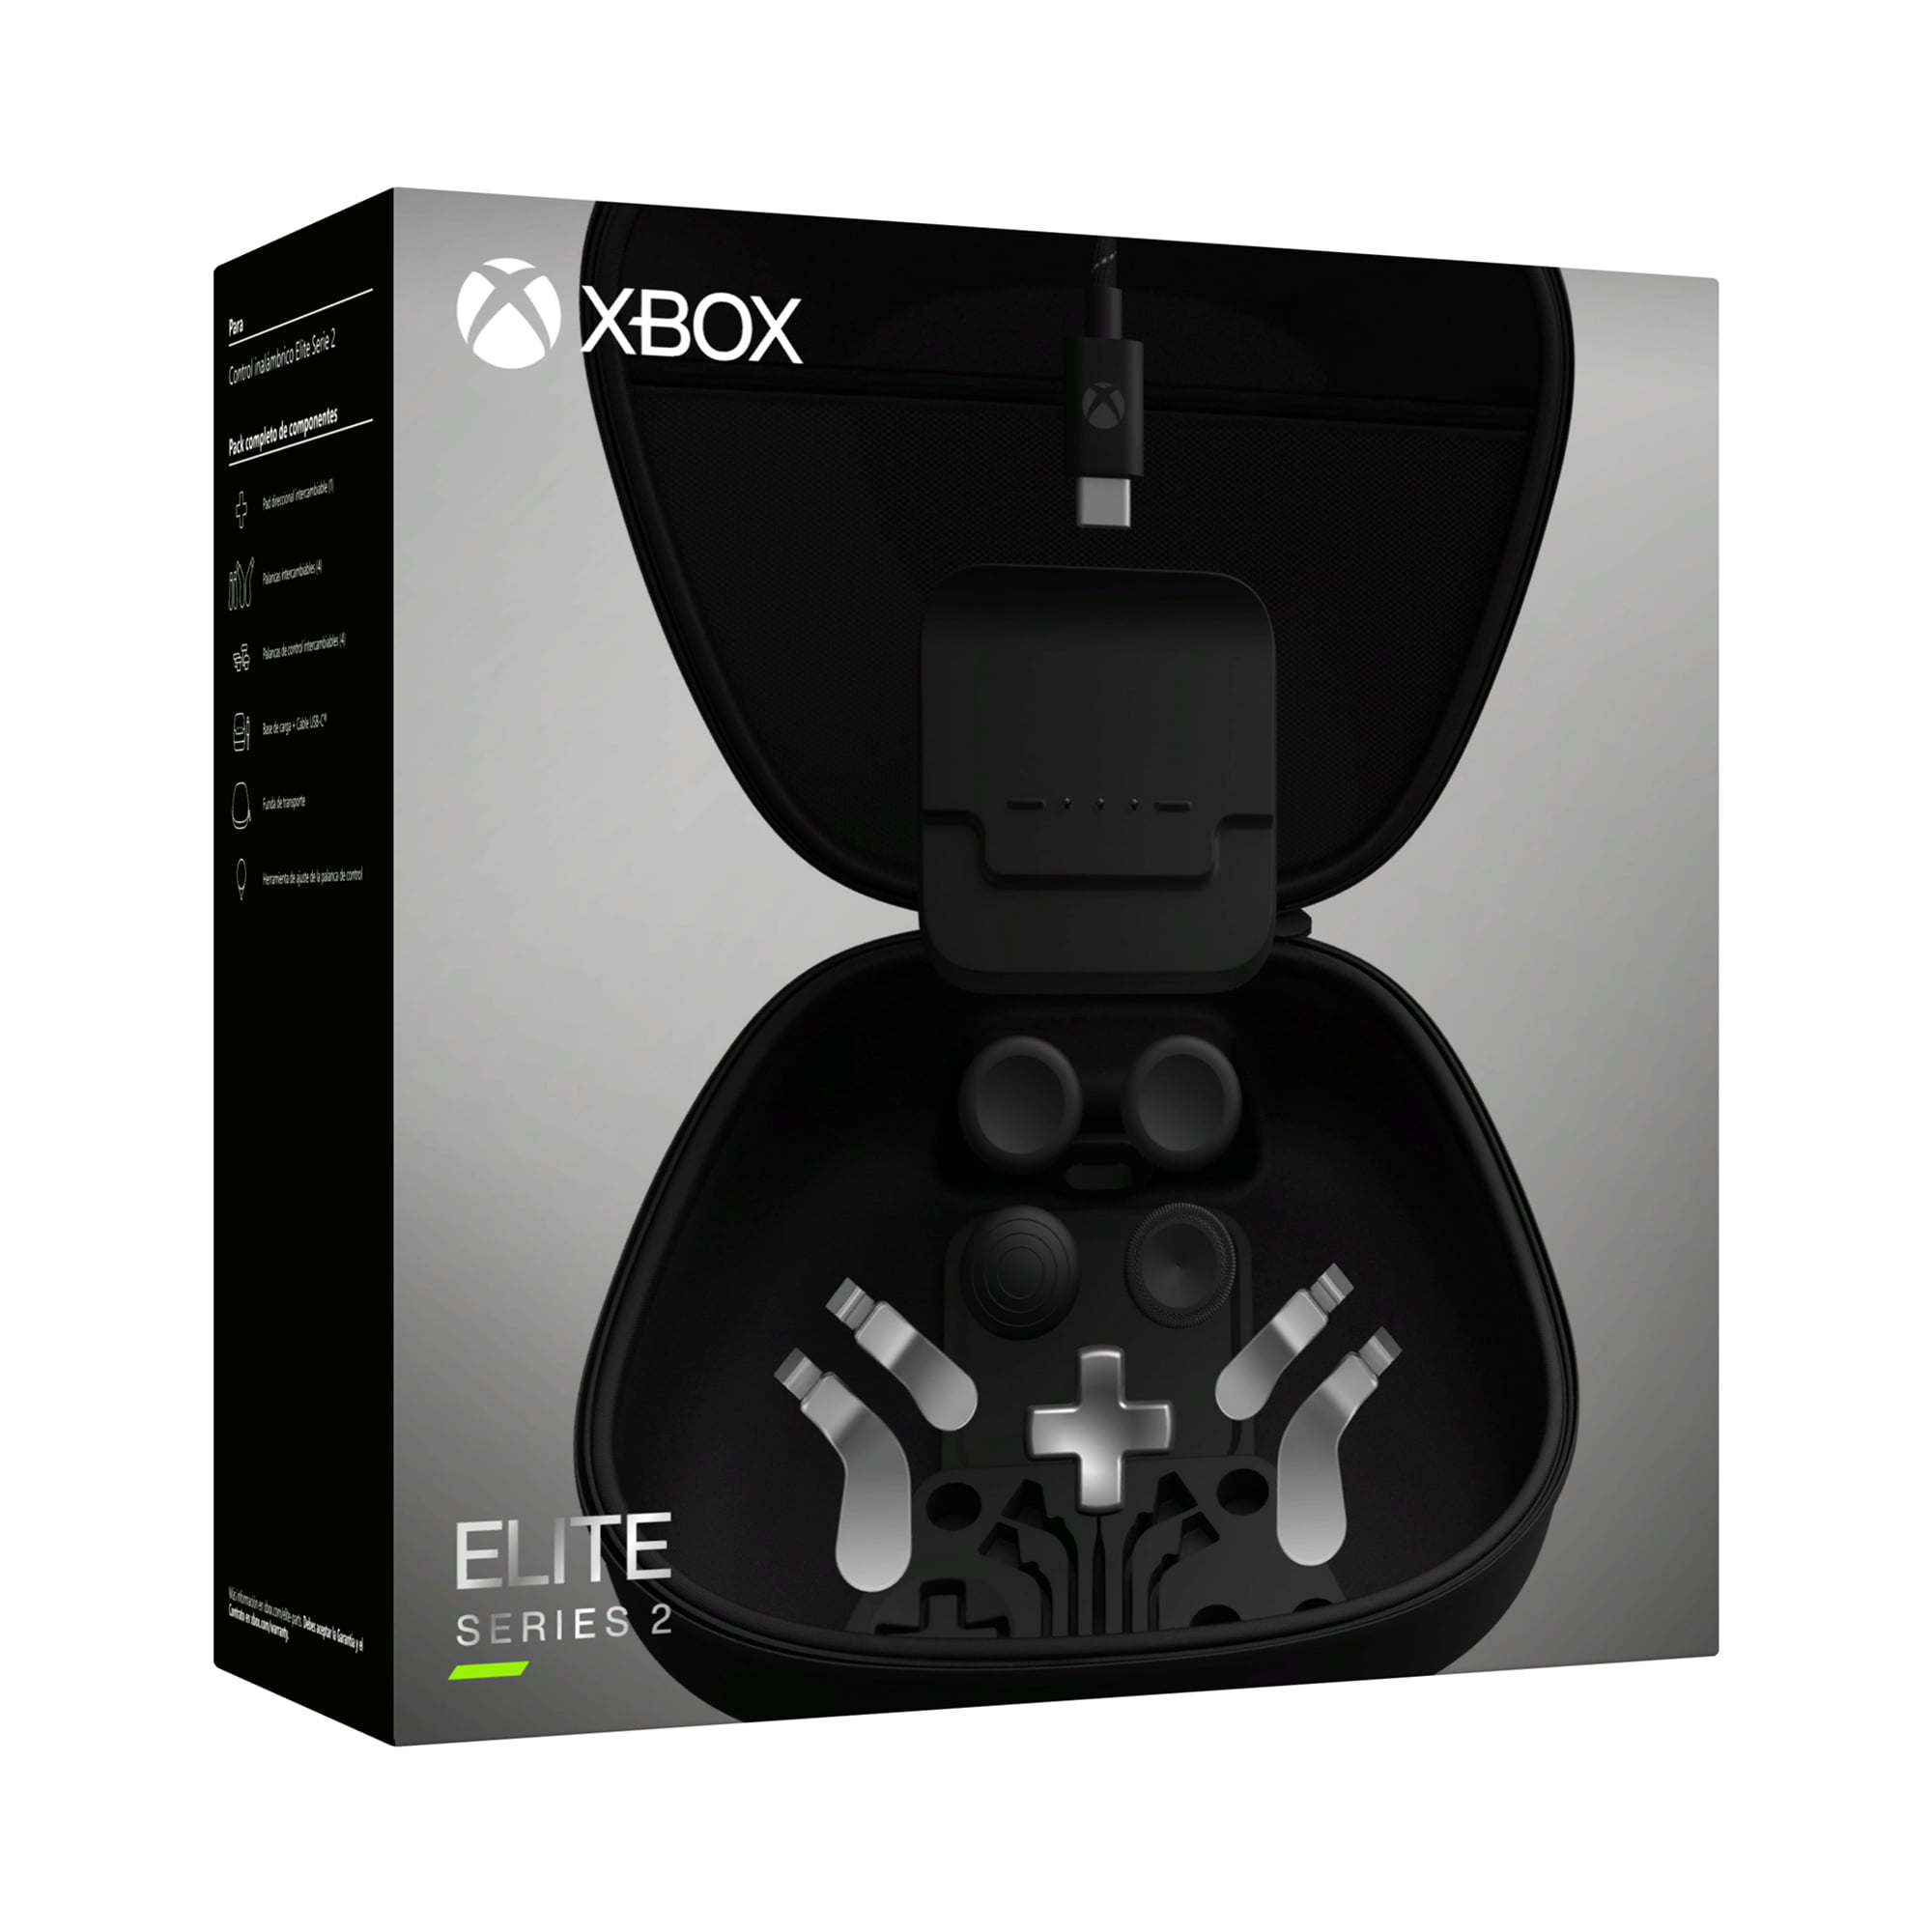  Complete Component Pack for Xbox Elite Controller Series 2 -  Accessories Includes 1 Carrying Case, 1 Charging Dock, 4 Thumbsticks, 4  Paddles and 1 Adjustment Tool : Video Games